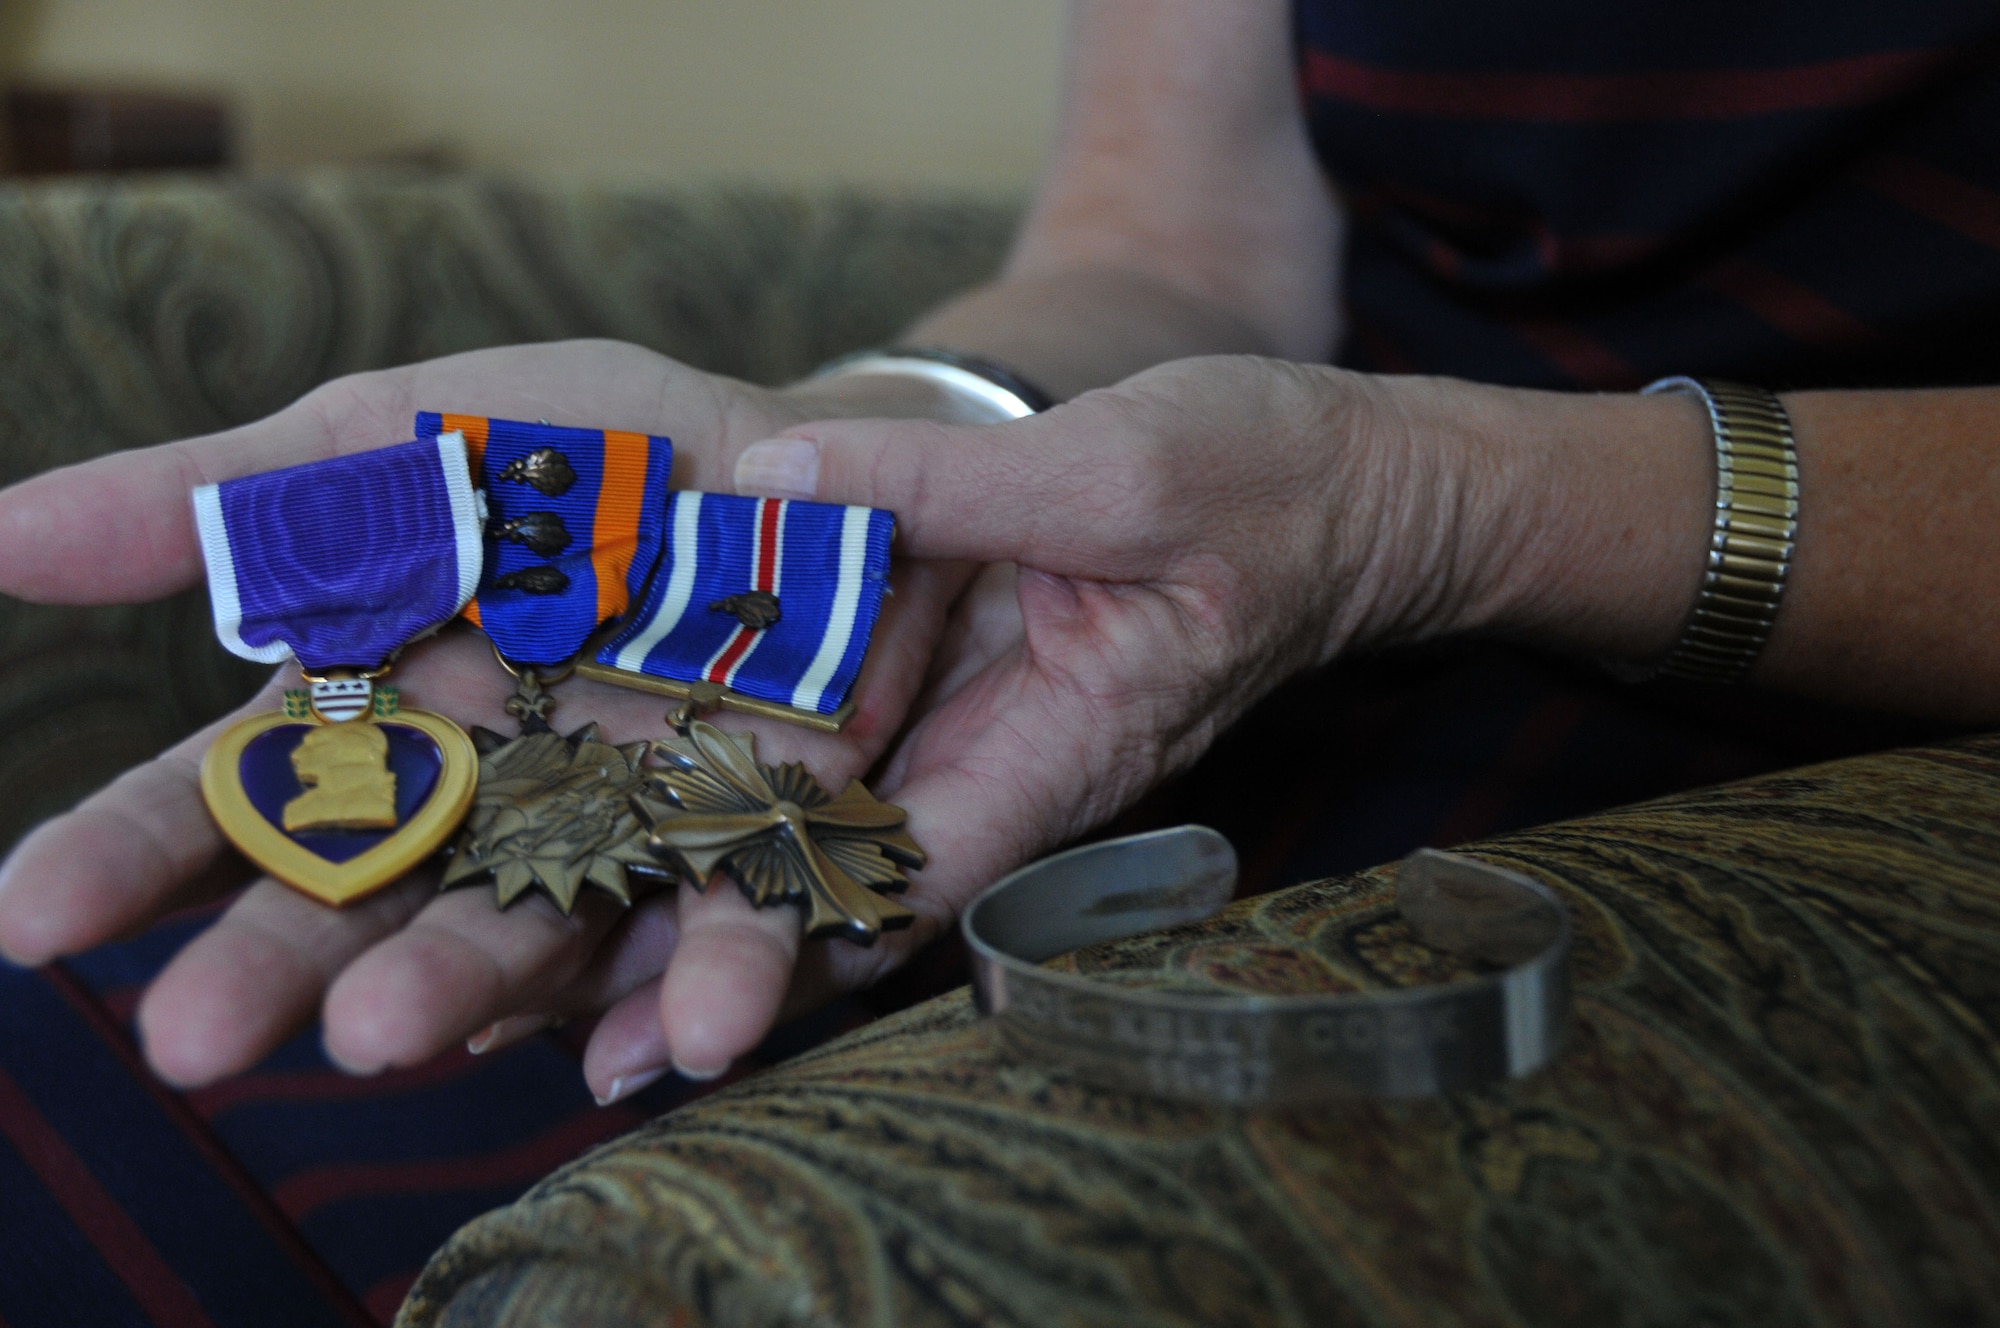 Maureen Kozak holds her father’s medals and displays a Prisoner of War Missing in Action bracelet bearing his name. Col. Kelly F. Cook was a fighter pilot who was listed as MIA in Vietnam and was later declared killed in action, body not recovered. Cook’s medals include a Purple Heart, two Distinguished Flying Crosses and four Air Medals. Maureen has corresponded with several supporters across the nation who have worn a POW/MIA bracelet with her father’s name on it, including a family she sends a Christmas card to every year. Maureen wore her bracelet as a teenager through adulthood until it broke; it’s now stored for safekeeping. (U.S. Air Force photo/Staff Sgt. Mercedes Crossland)